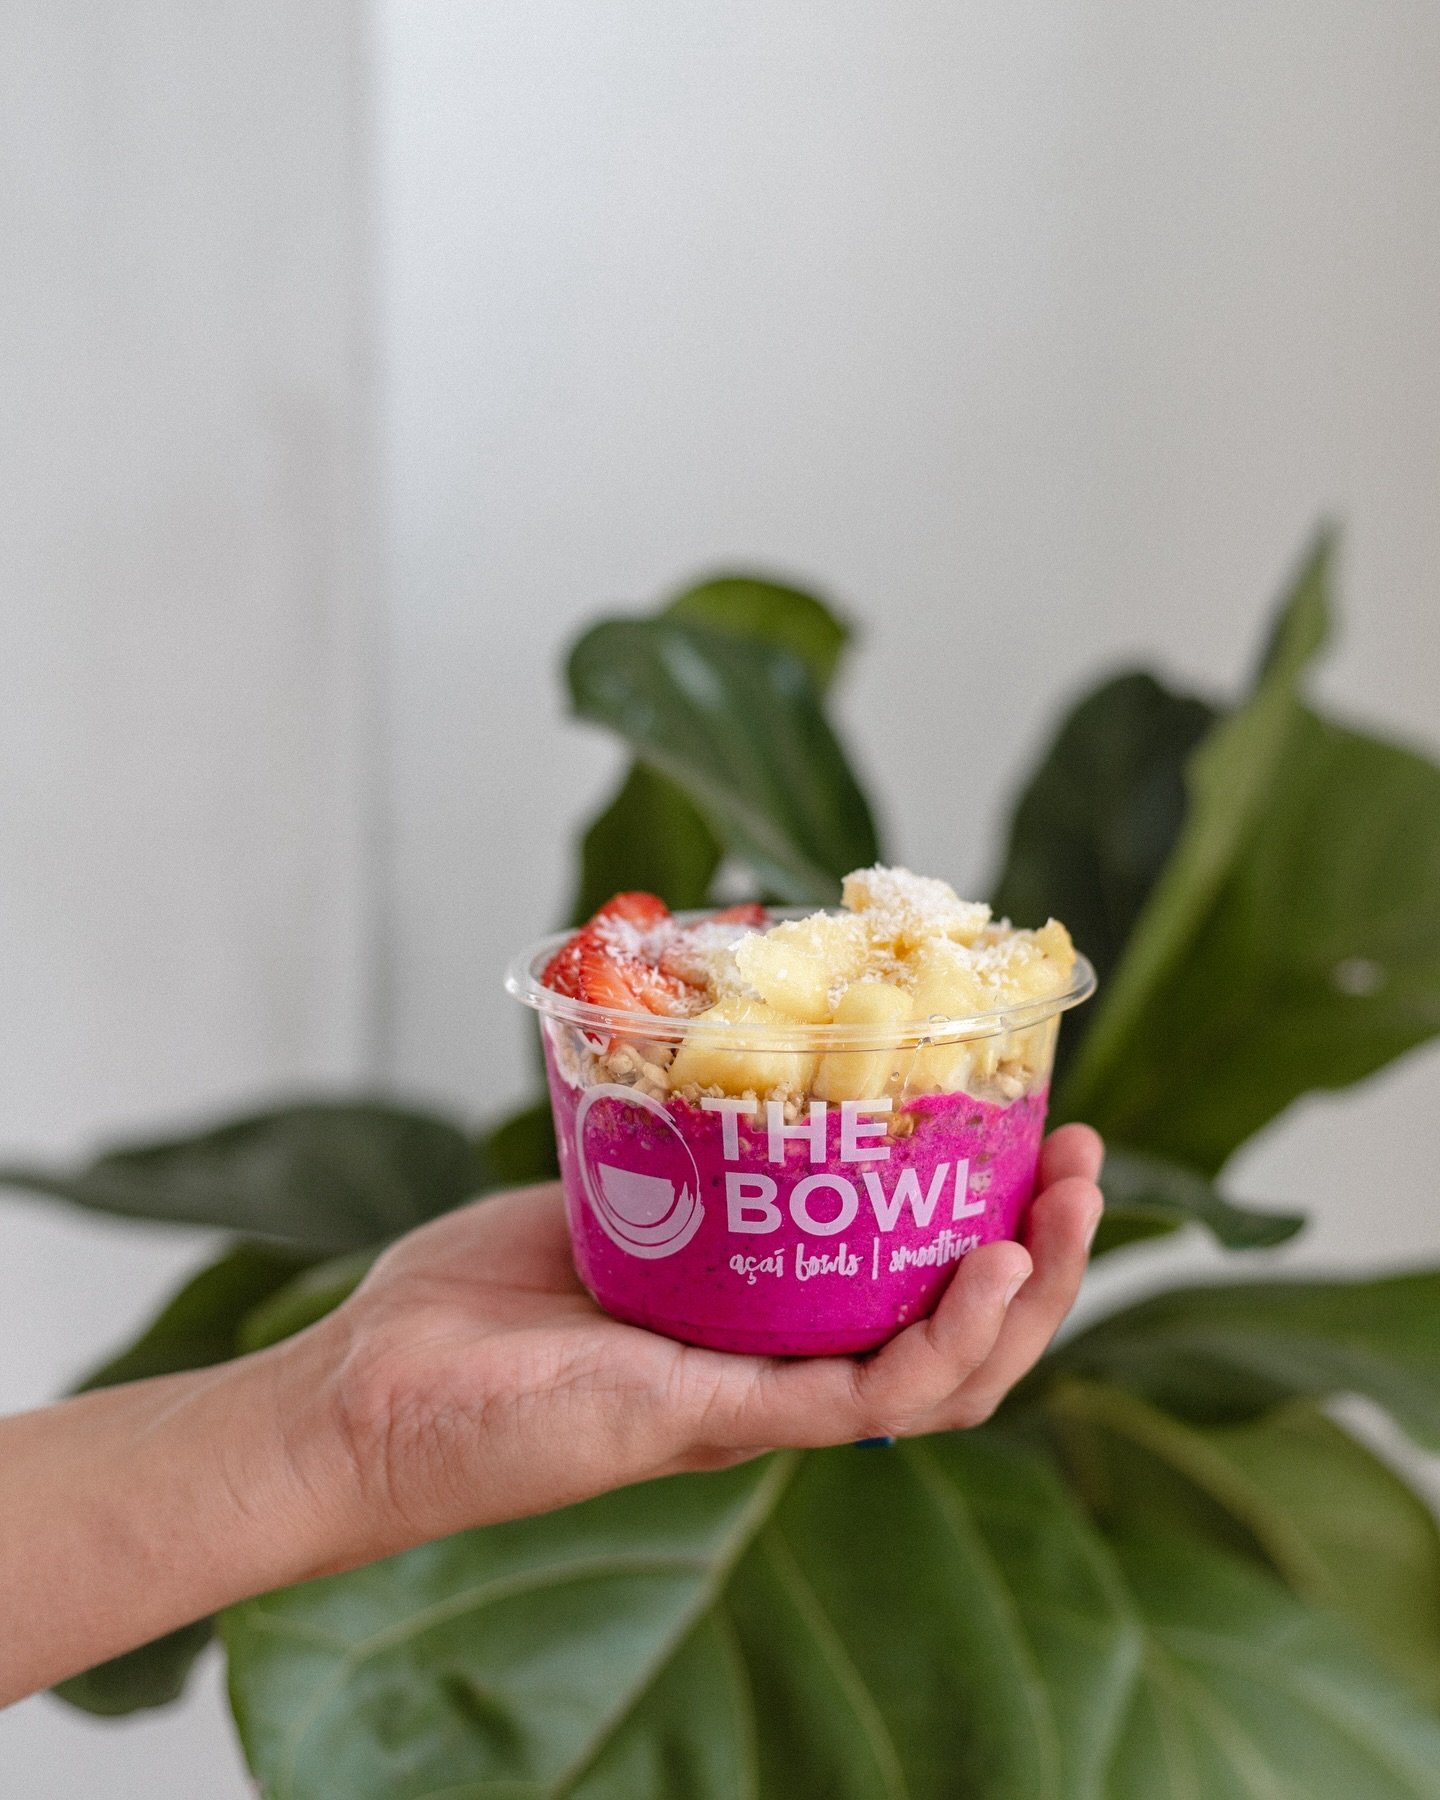 Hey you! We know you work hard&hellip;you deserve to treat yourself with one of our Pitaya Bowls. An organic, cold, refreshing, mouth watering Pitaya Bowl. 🩷🌴✨ 

🌺 Islamorada - blend of pitaya, strawberries, banana, pineapple juice, coconut milk &